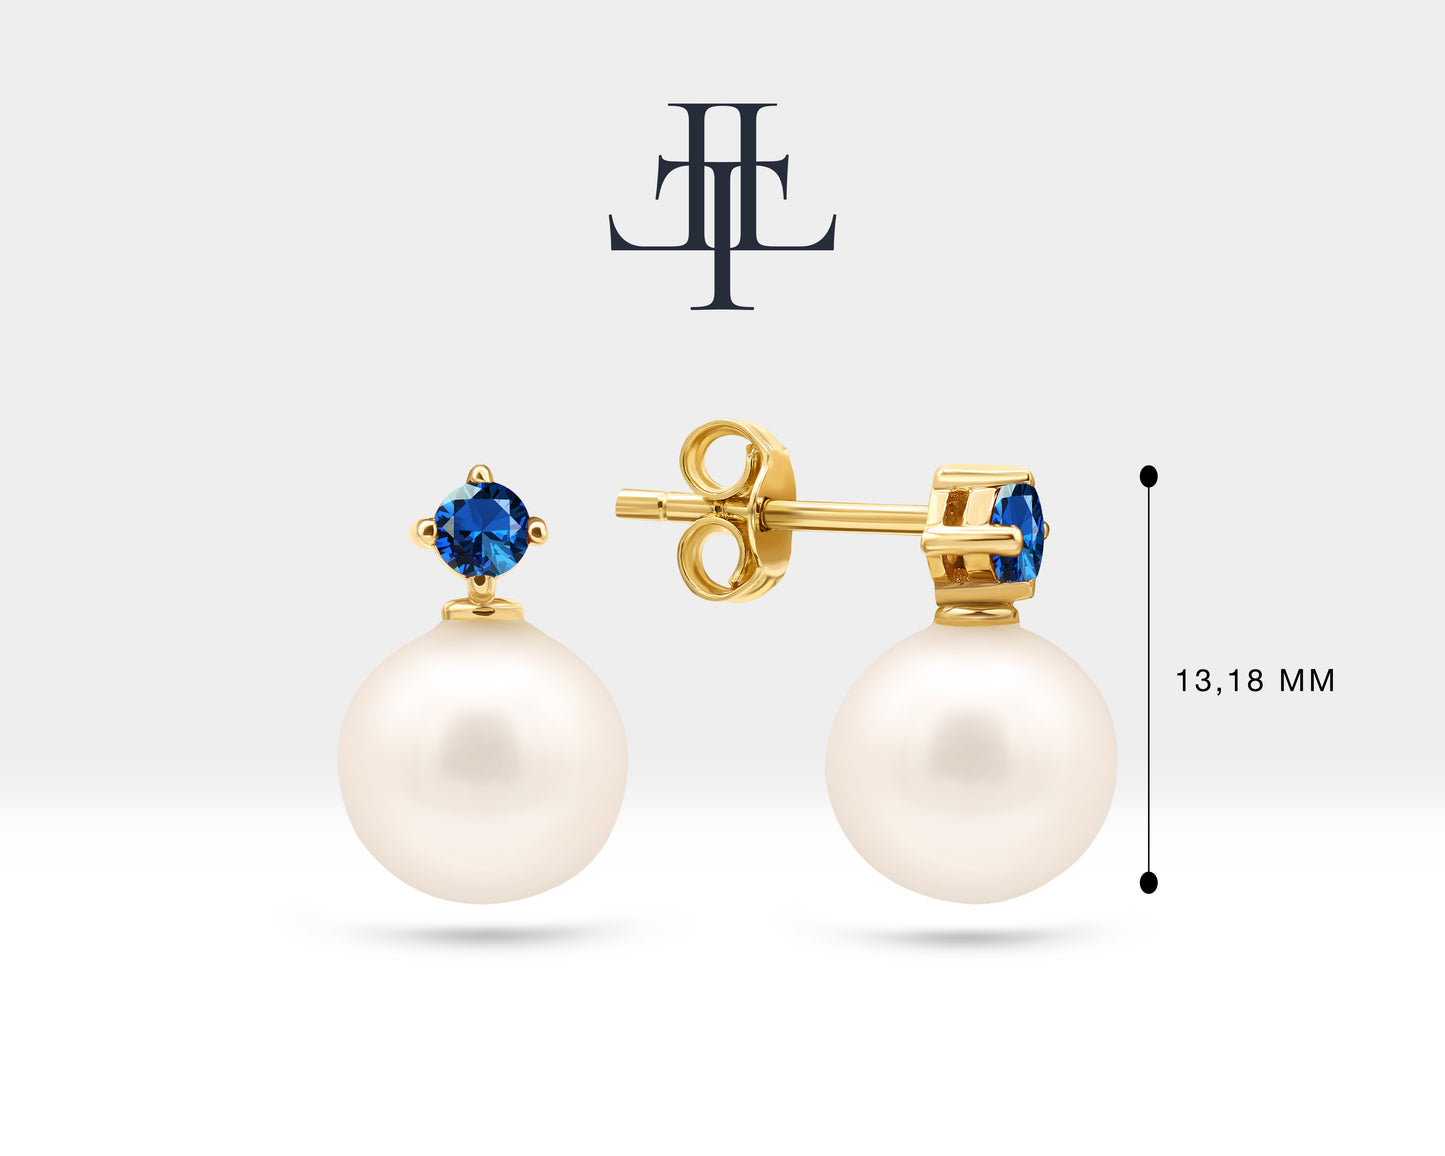 Pearl Earrings with Round Cut Sapphire Earring in 14K Solid Gold Stud Earrings for Women Wedding Jewelry | LES00006PS